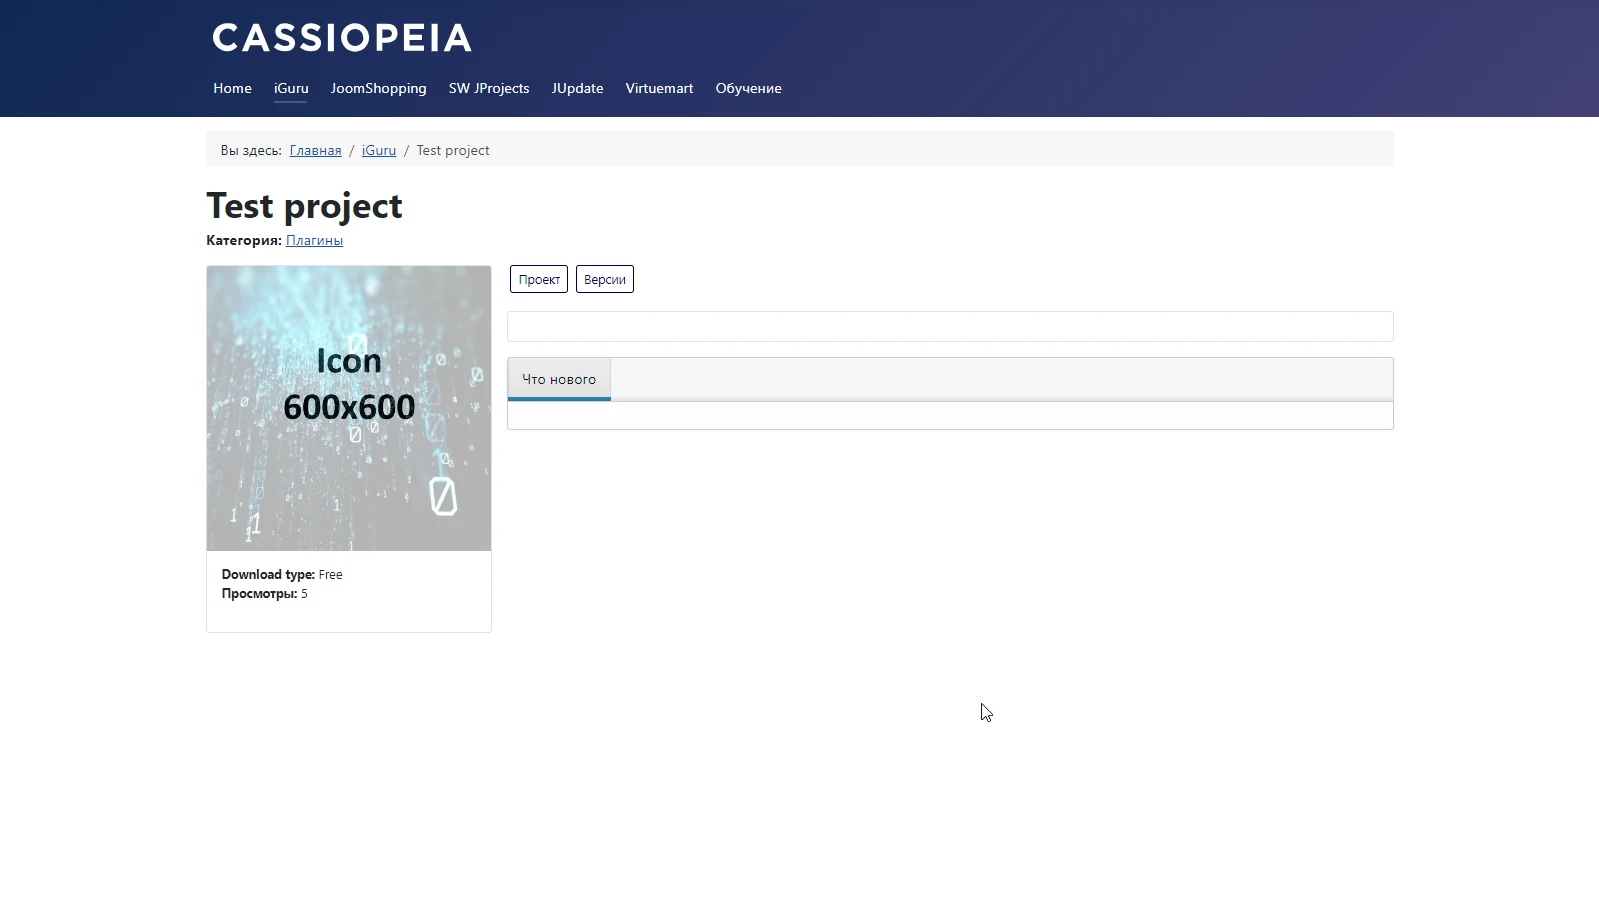 Screenshot of the SW JProjects project on the Cassiopeia Joomla 5 template